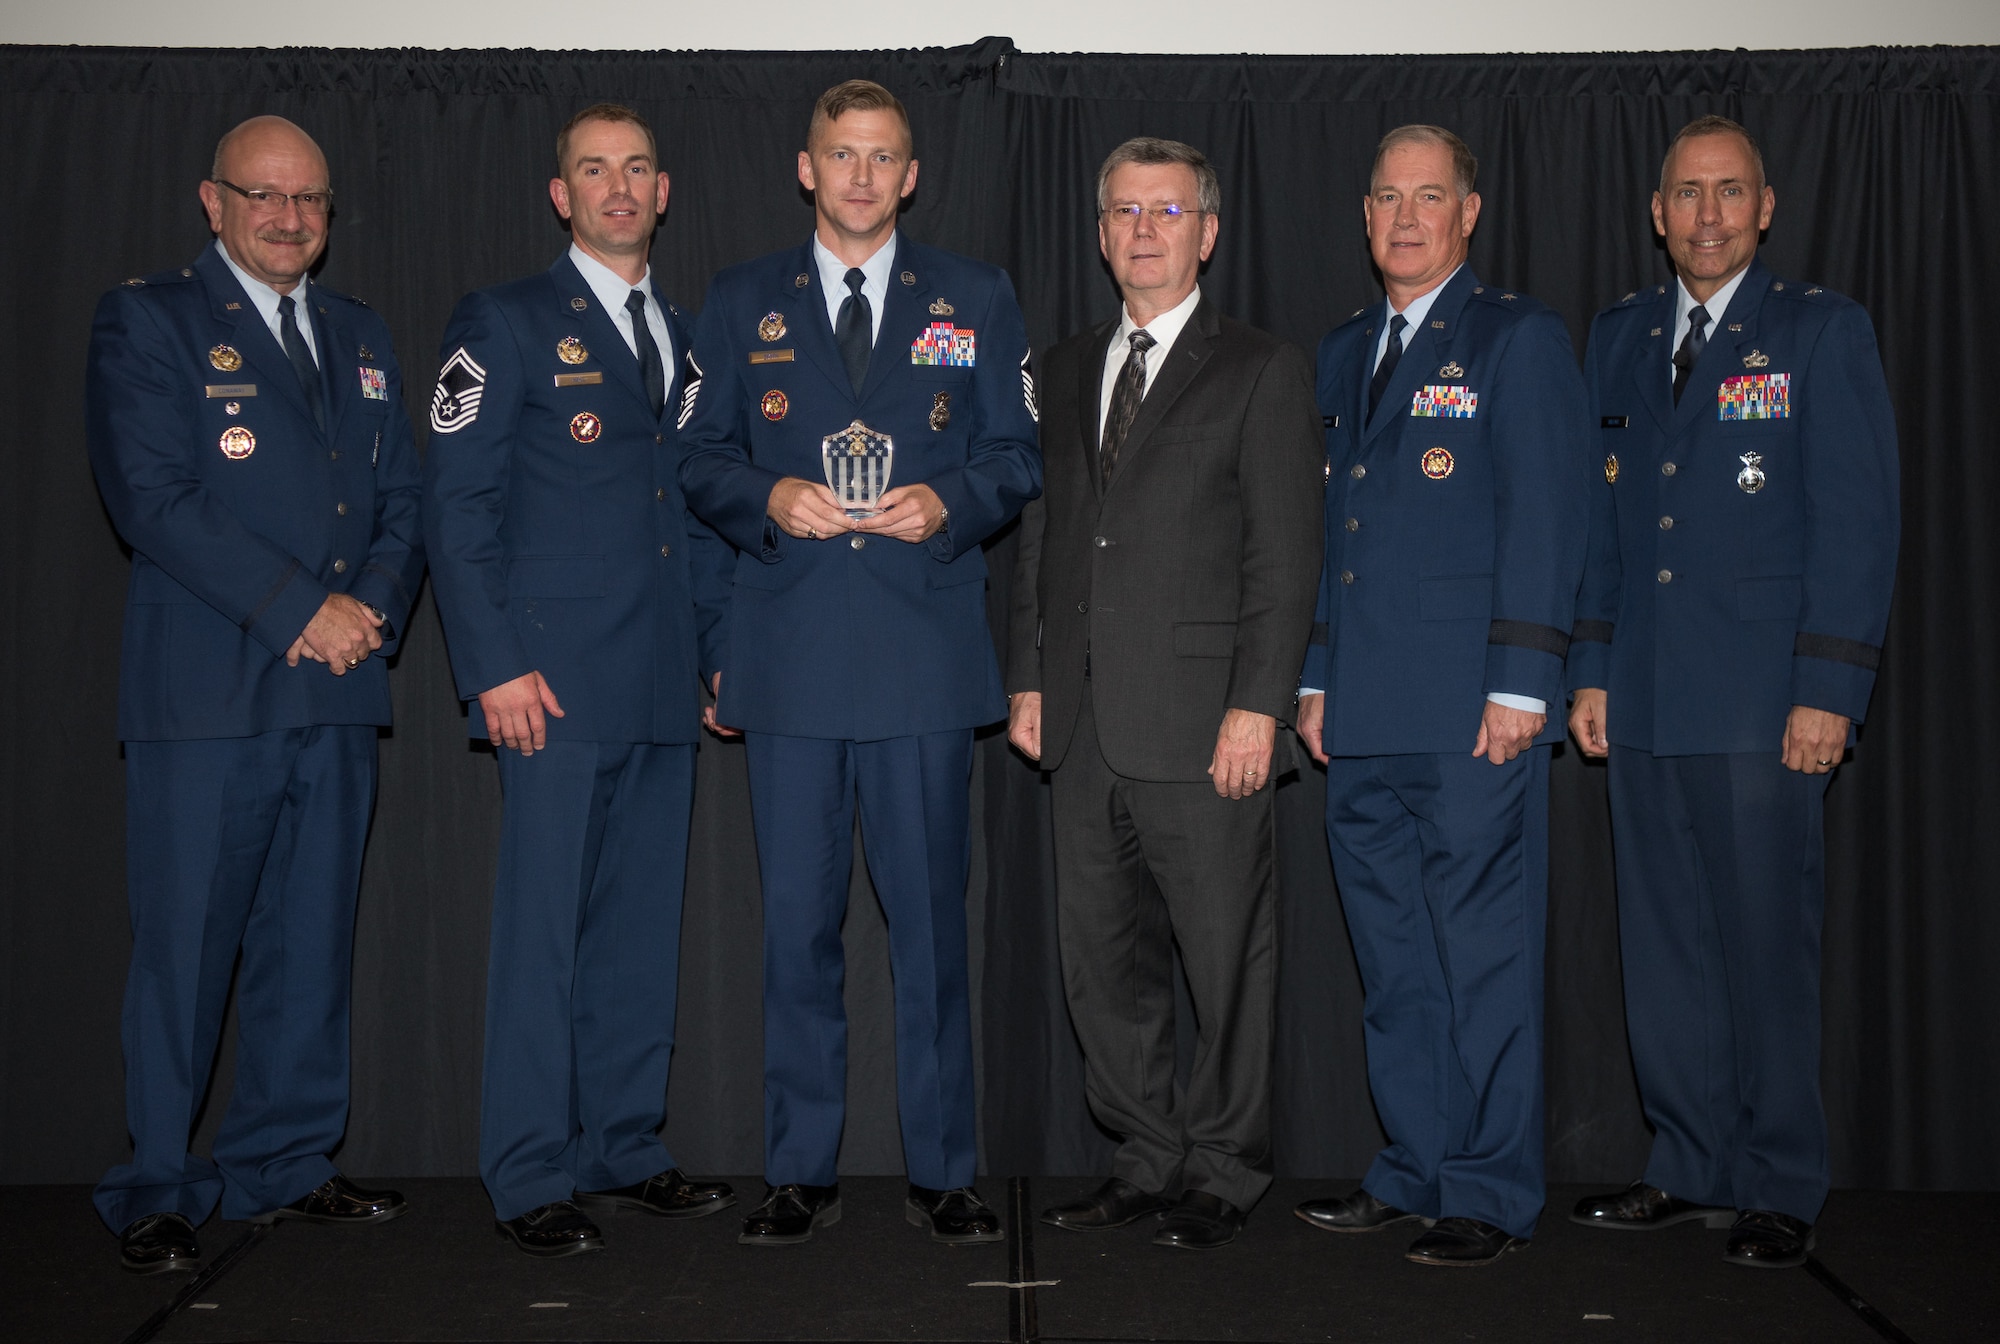 Master Sgt. Olen Smith III, National Guard Bureau/Air National Guard Security Forces Division, Joint Base Andrews, Maryland, receives the Air National Guard Higher Headquarters Staff Noncommissioned Officer of 2017 Award at the 2018 Air National Guard Security Forces Squadron Dinner and Awards Banquet at the National Center for Employee Development Conference Center in Norman, Oklahoma, Sept. 12, 2018. Every year, leadership from all of the Air National Guard security forces squadrons meet in one place to discuss past, current and upcoming topics that impact the career field, as well as recognize outstanding security forces Airmen. (U.S. Air National Guard Photo by Staff Sgt. Kasey M. Phipps)